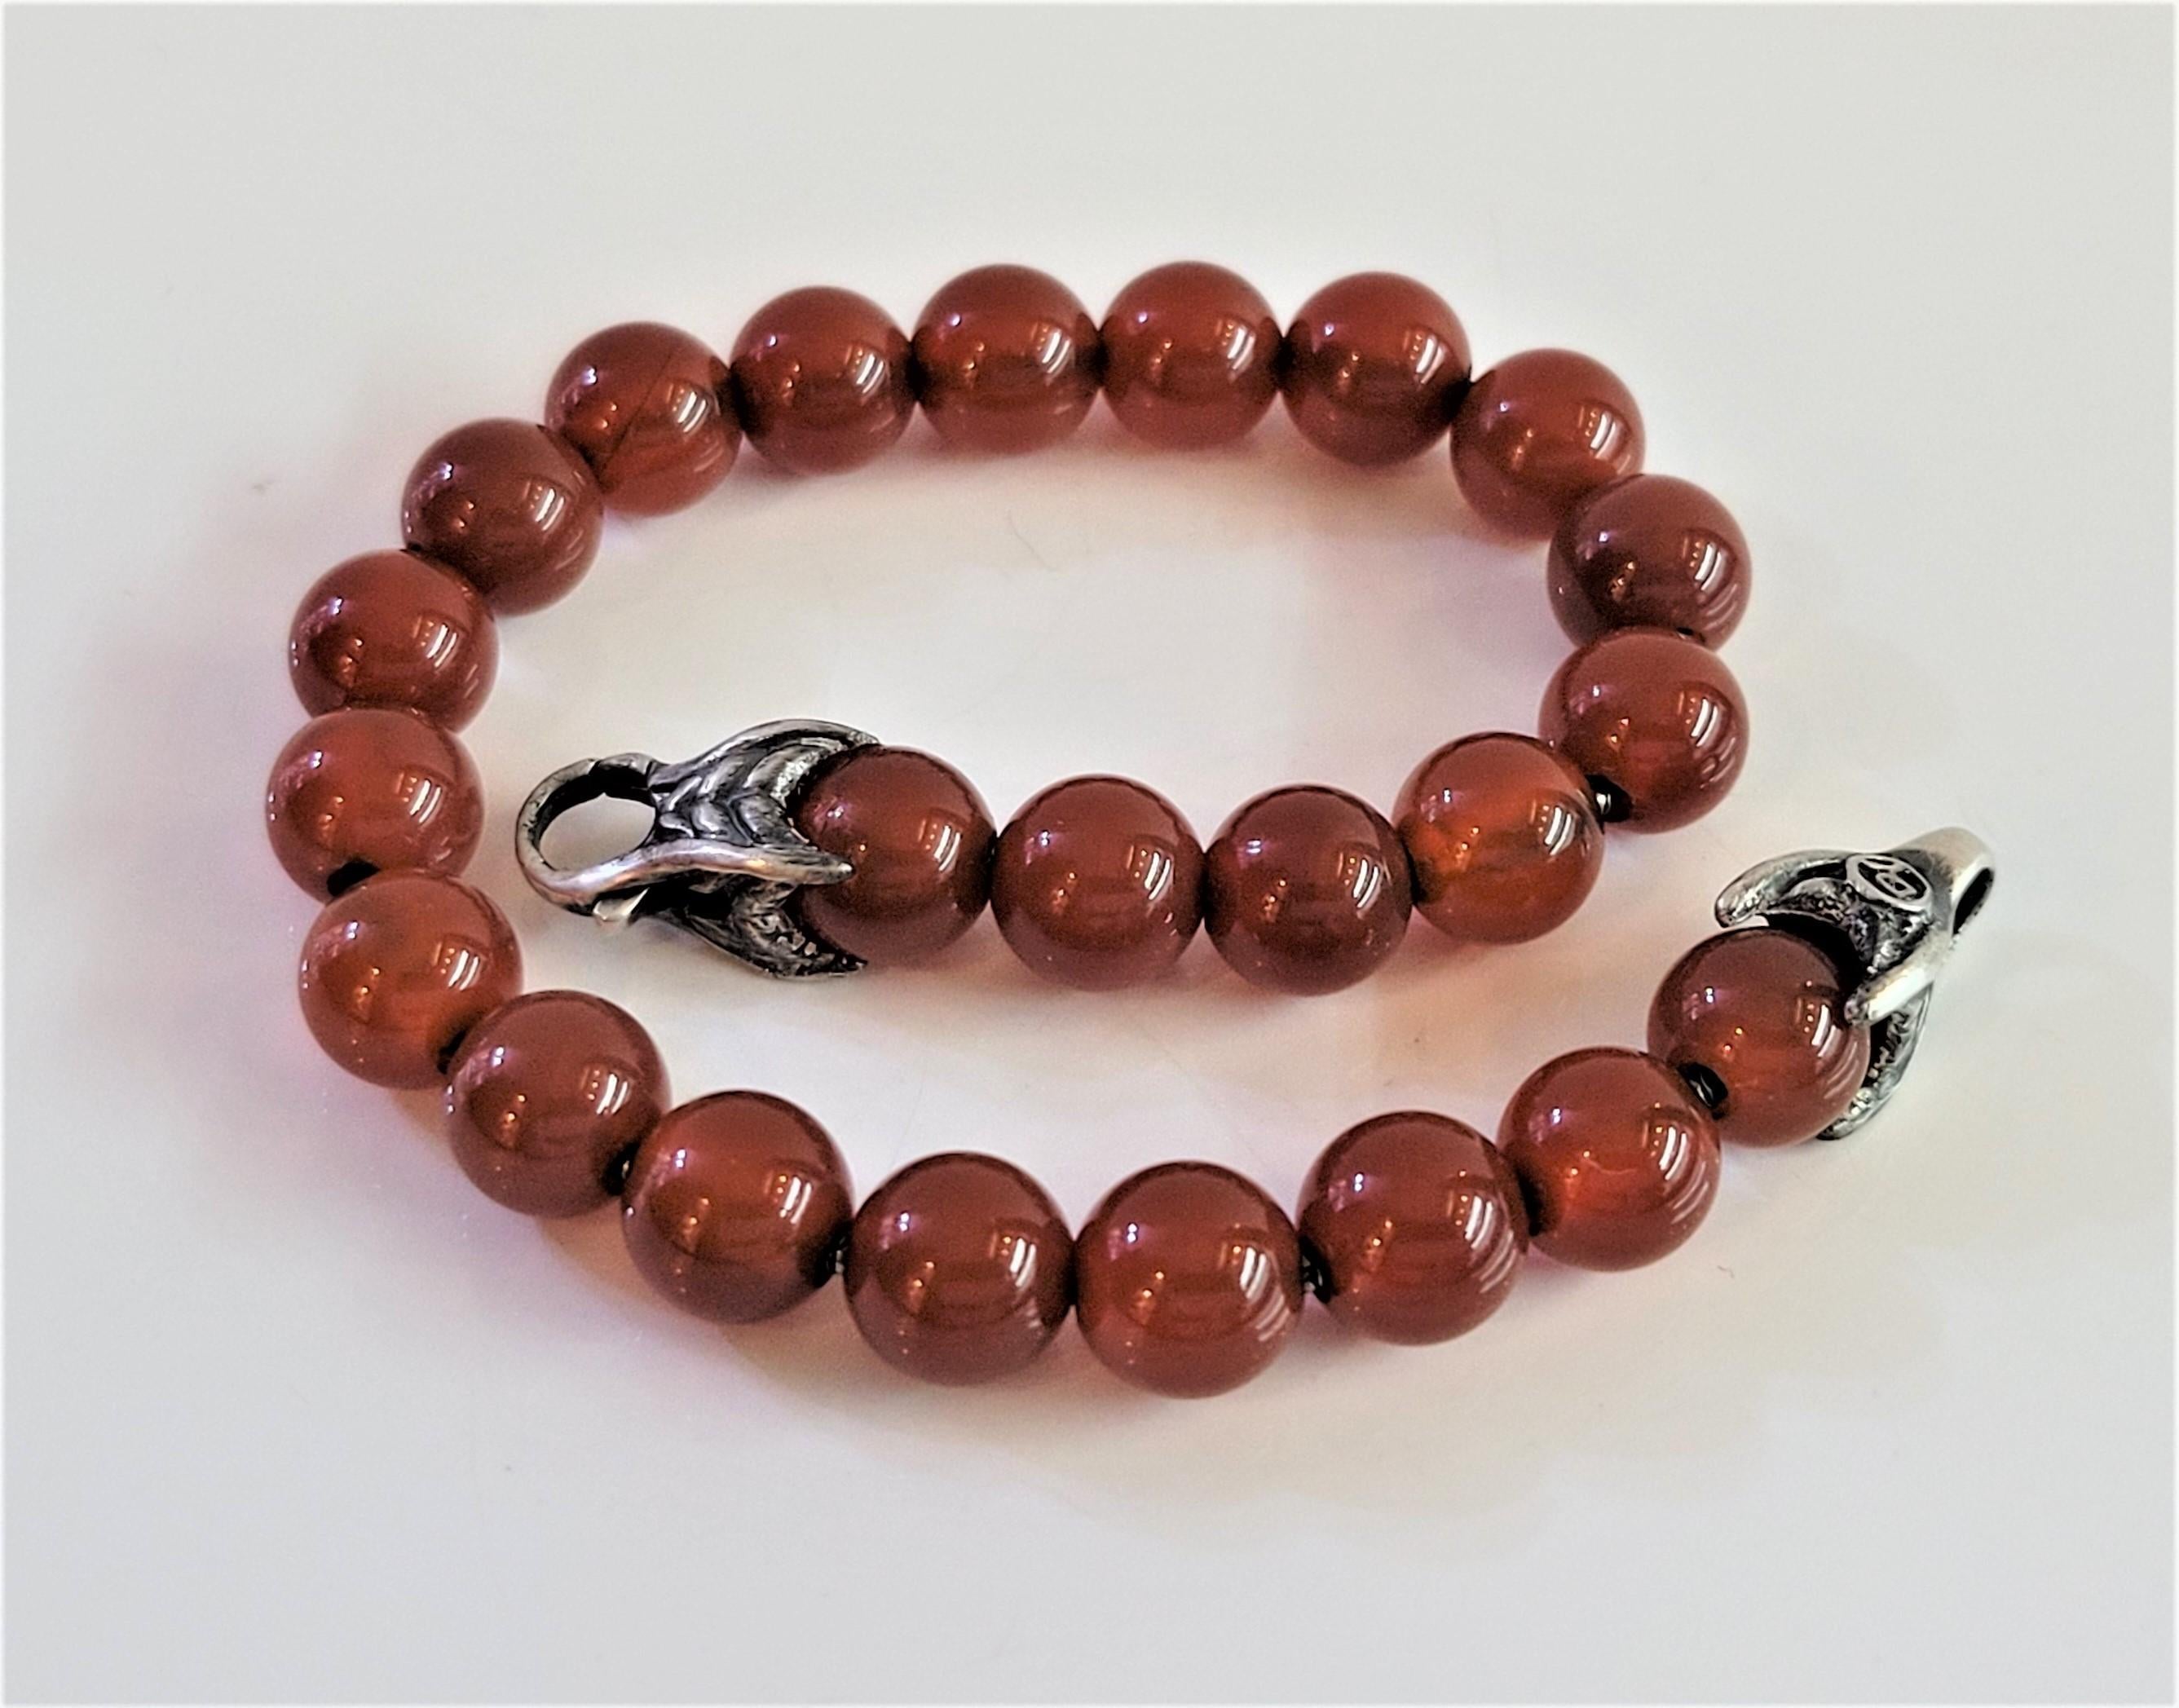 Brand David yurman 
Material Sterling Silver 925
Carnelian beads 8mm
Bracelet Length 8'' Long 
Condition New, never worn
Comes with David Yurman pouch